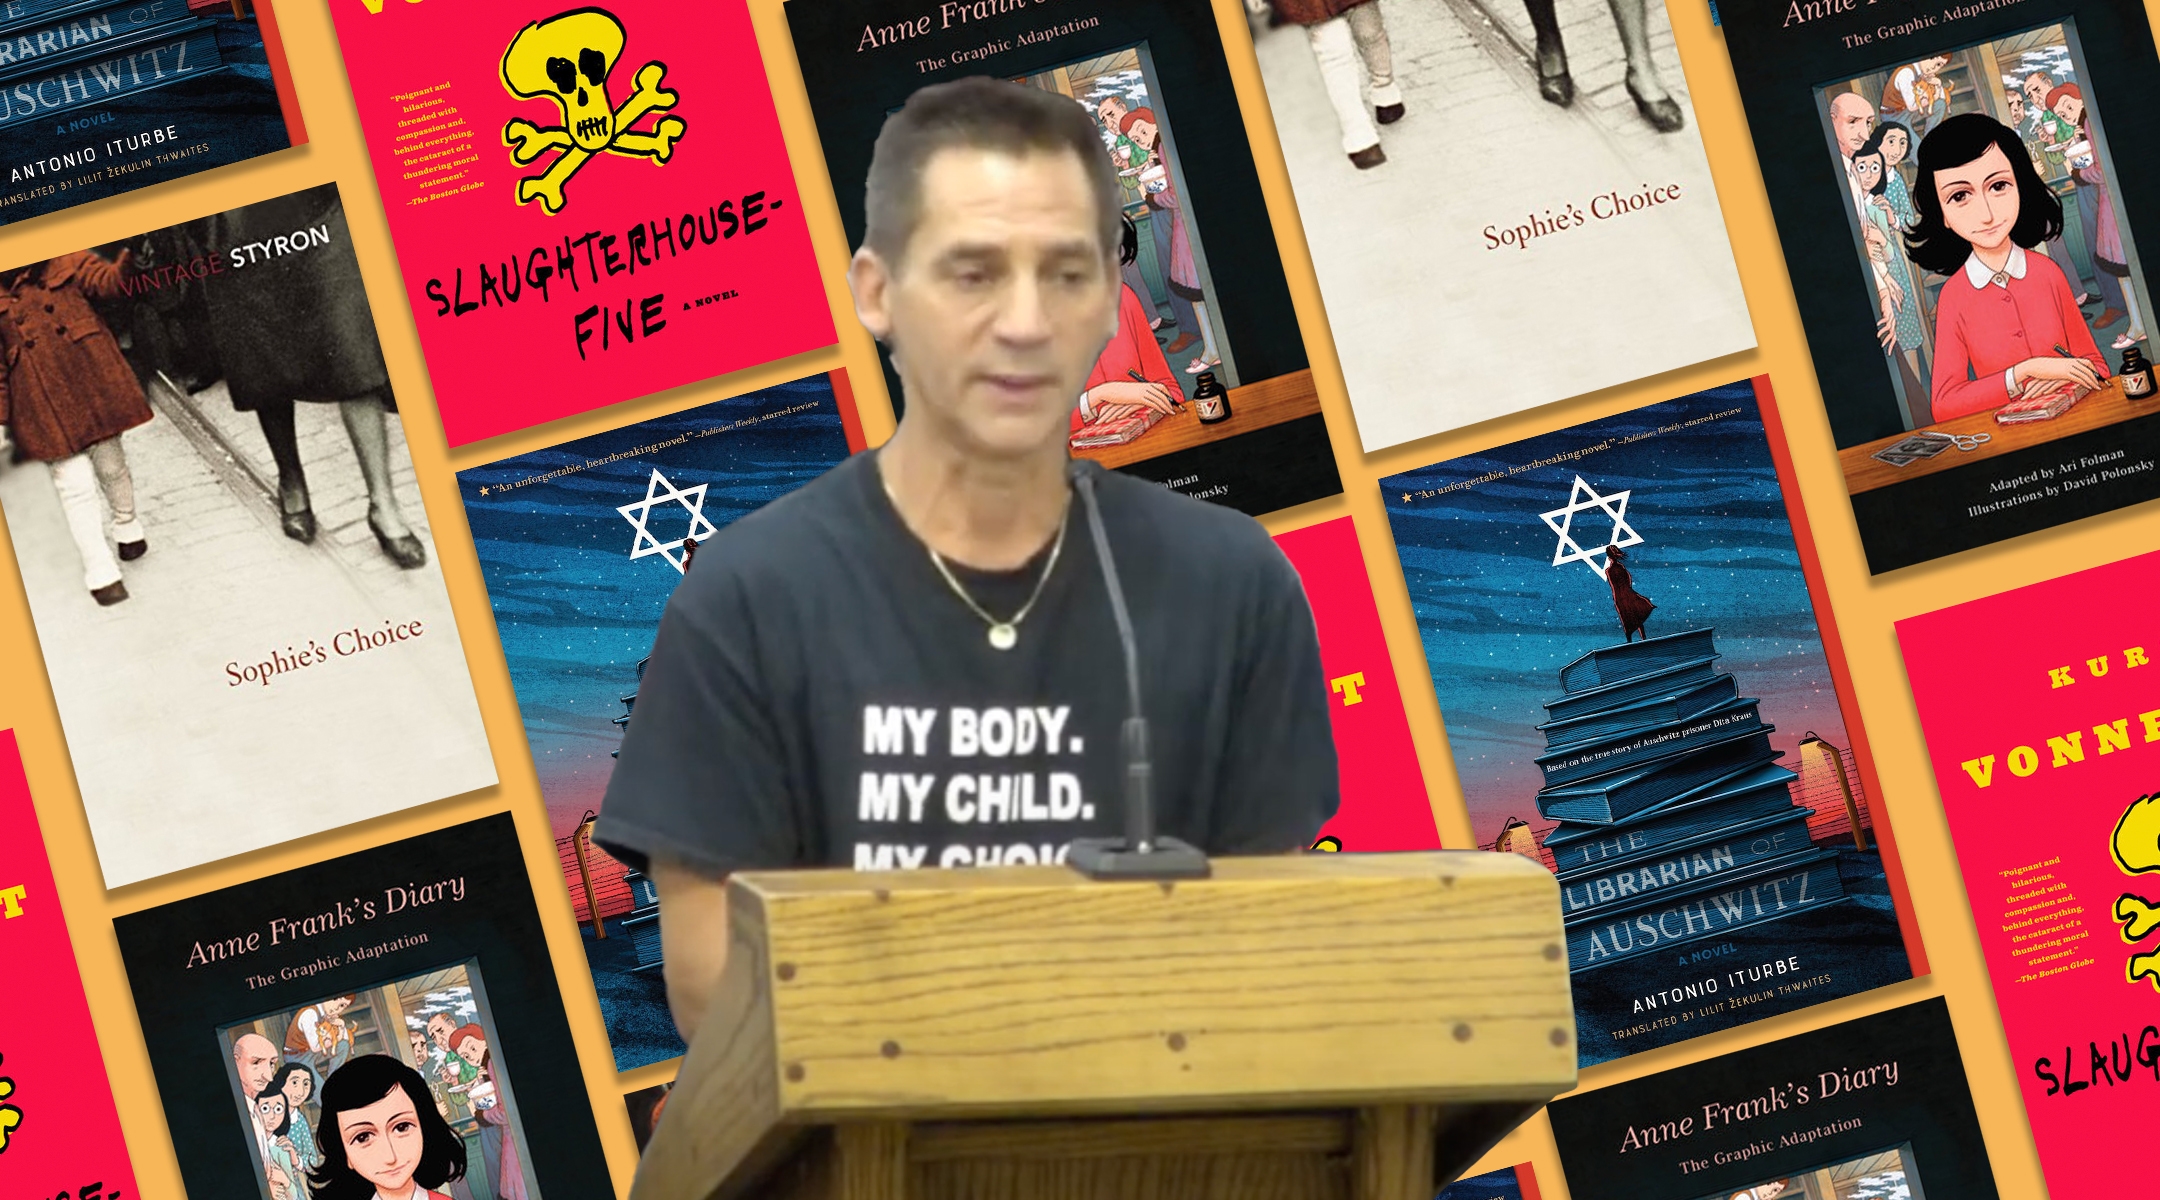 Prominent Jewish book-ban advocate says Florida’s crackdown on ‘frivolous challenges’ won’t deter him